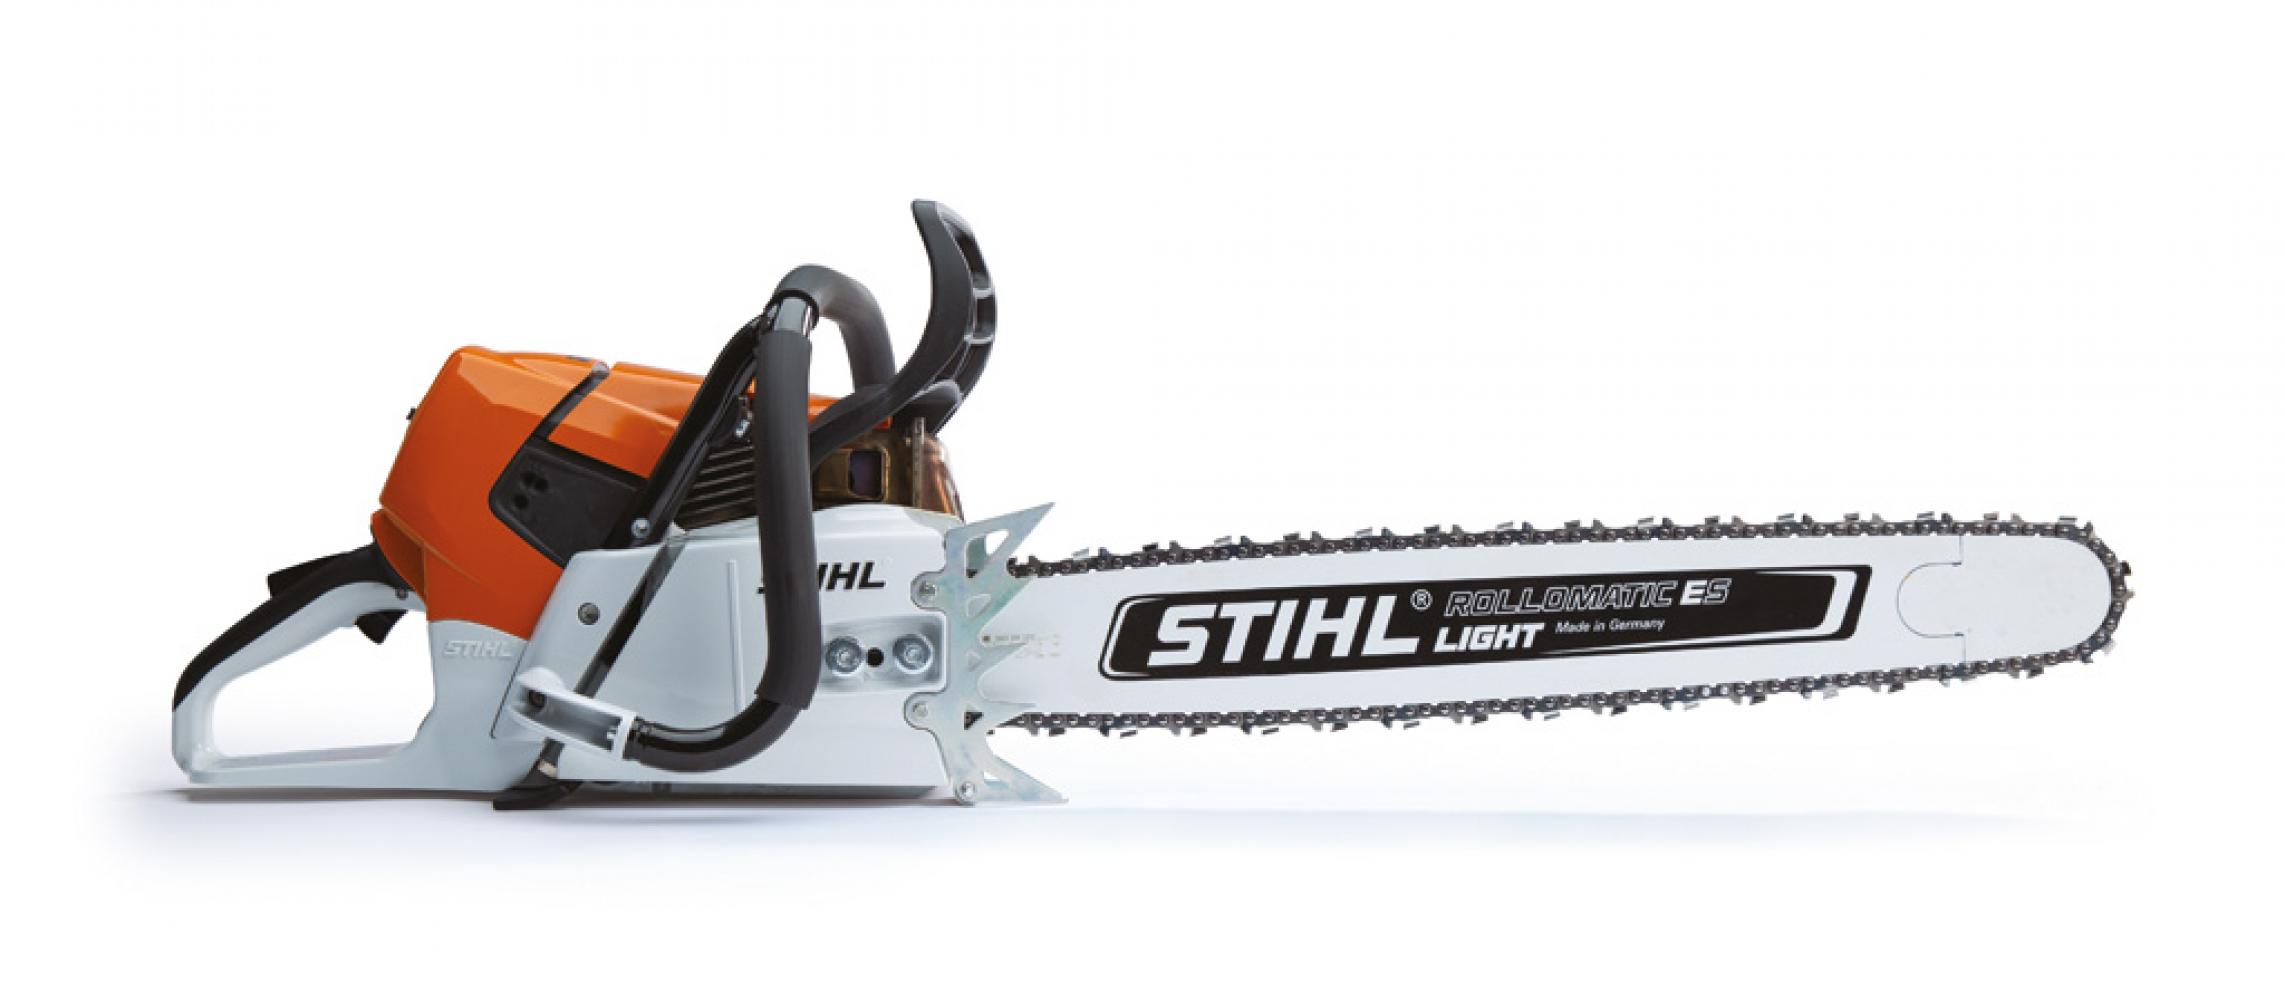 25" MS 661 C-M Gas Chainsaw